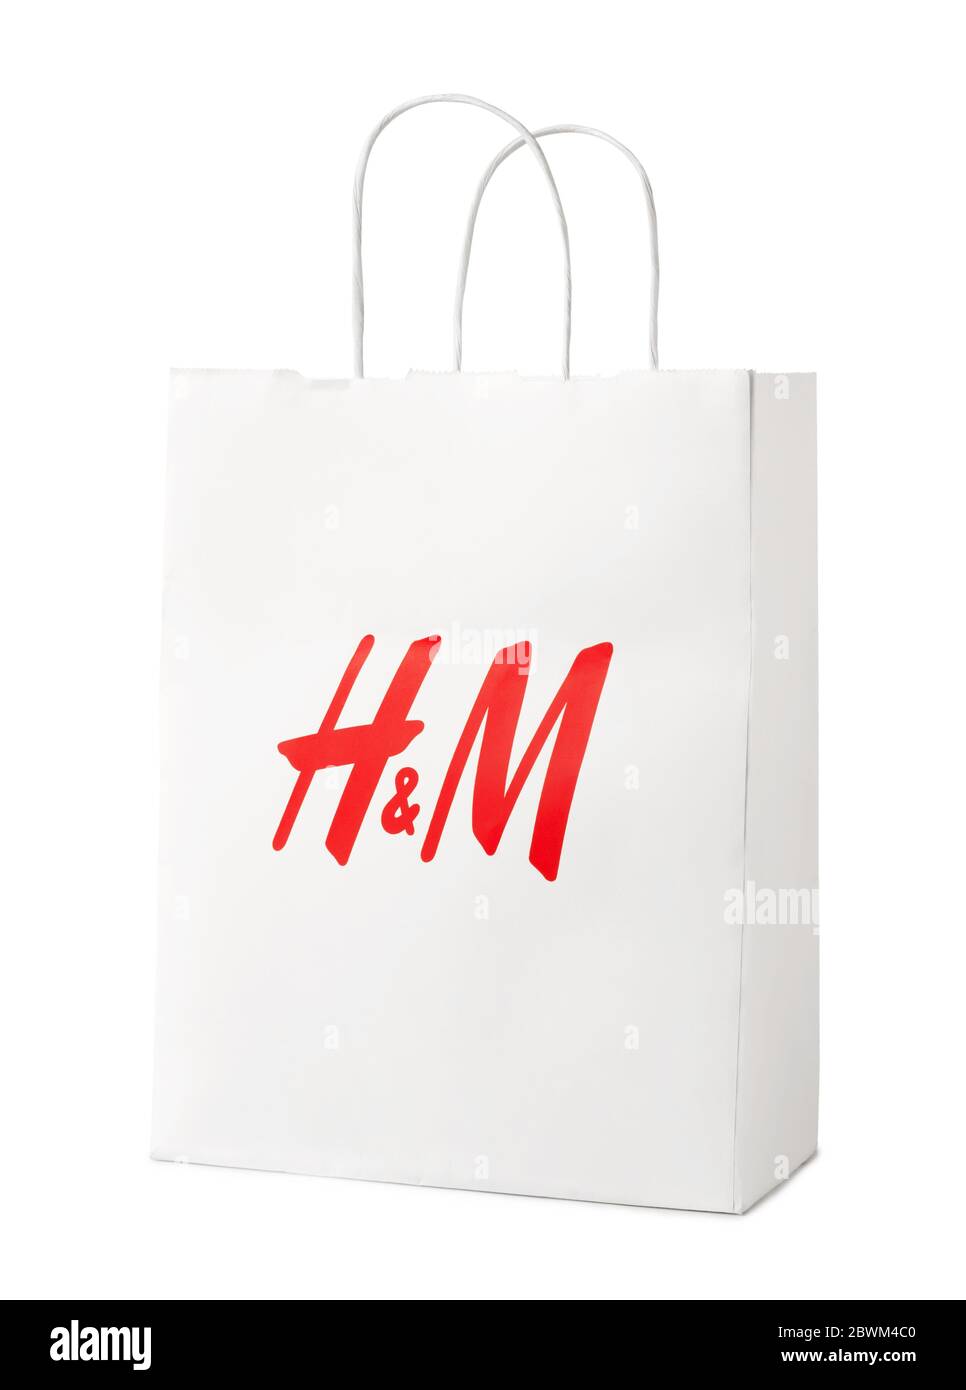 Hennes And Mauritz High Resolution Stock Photography and Images - Alamy